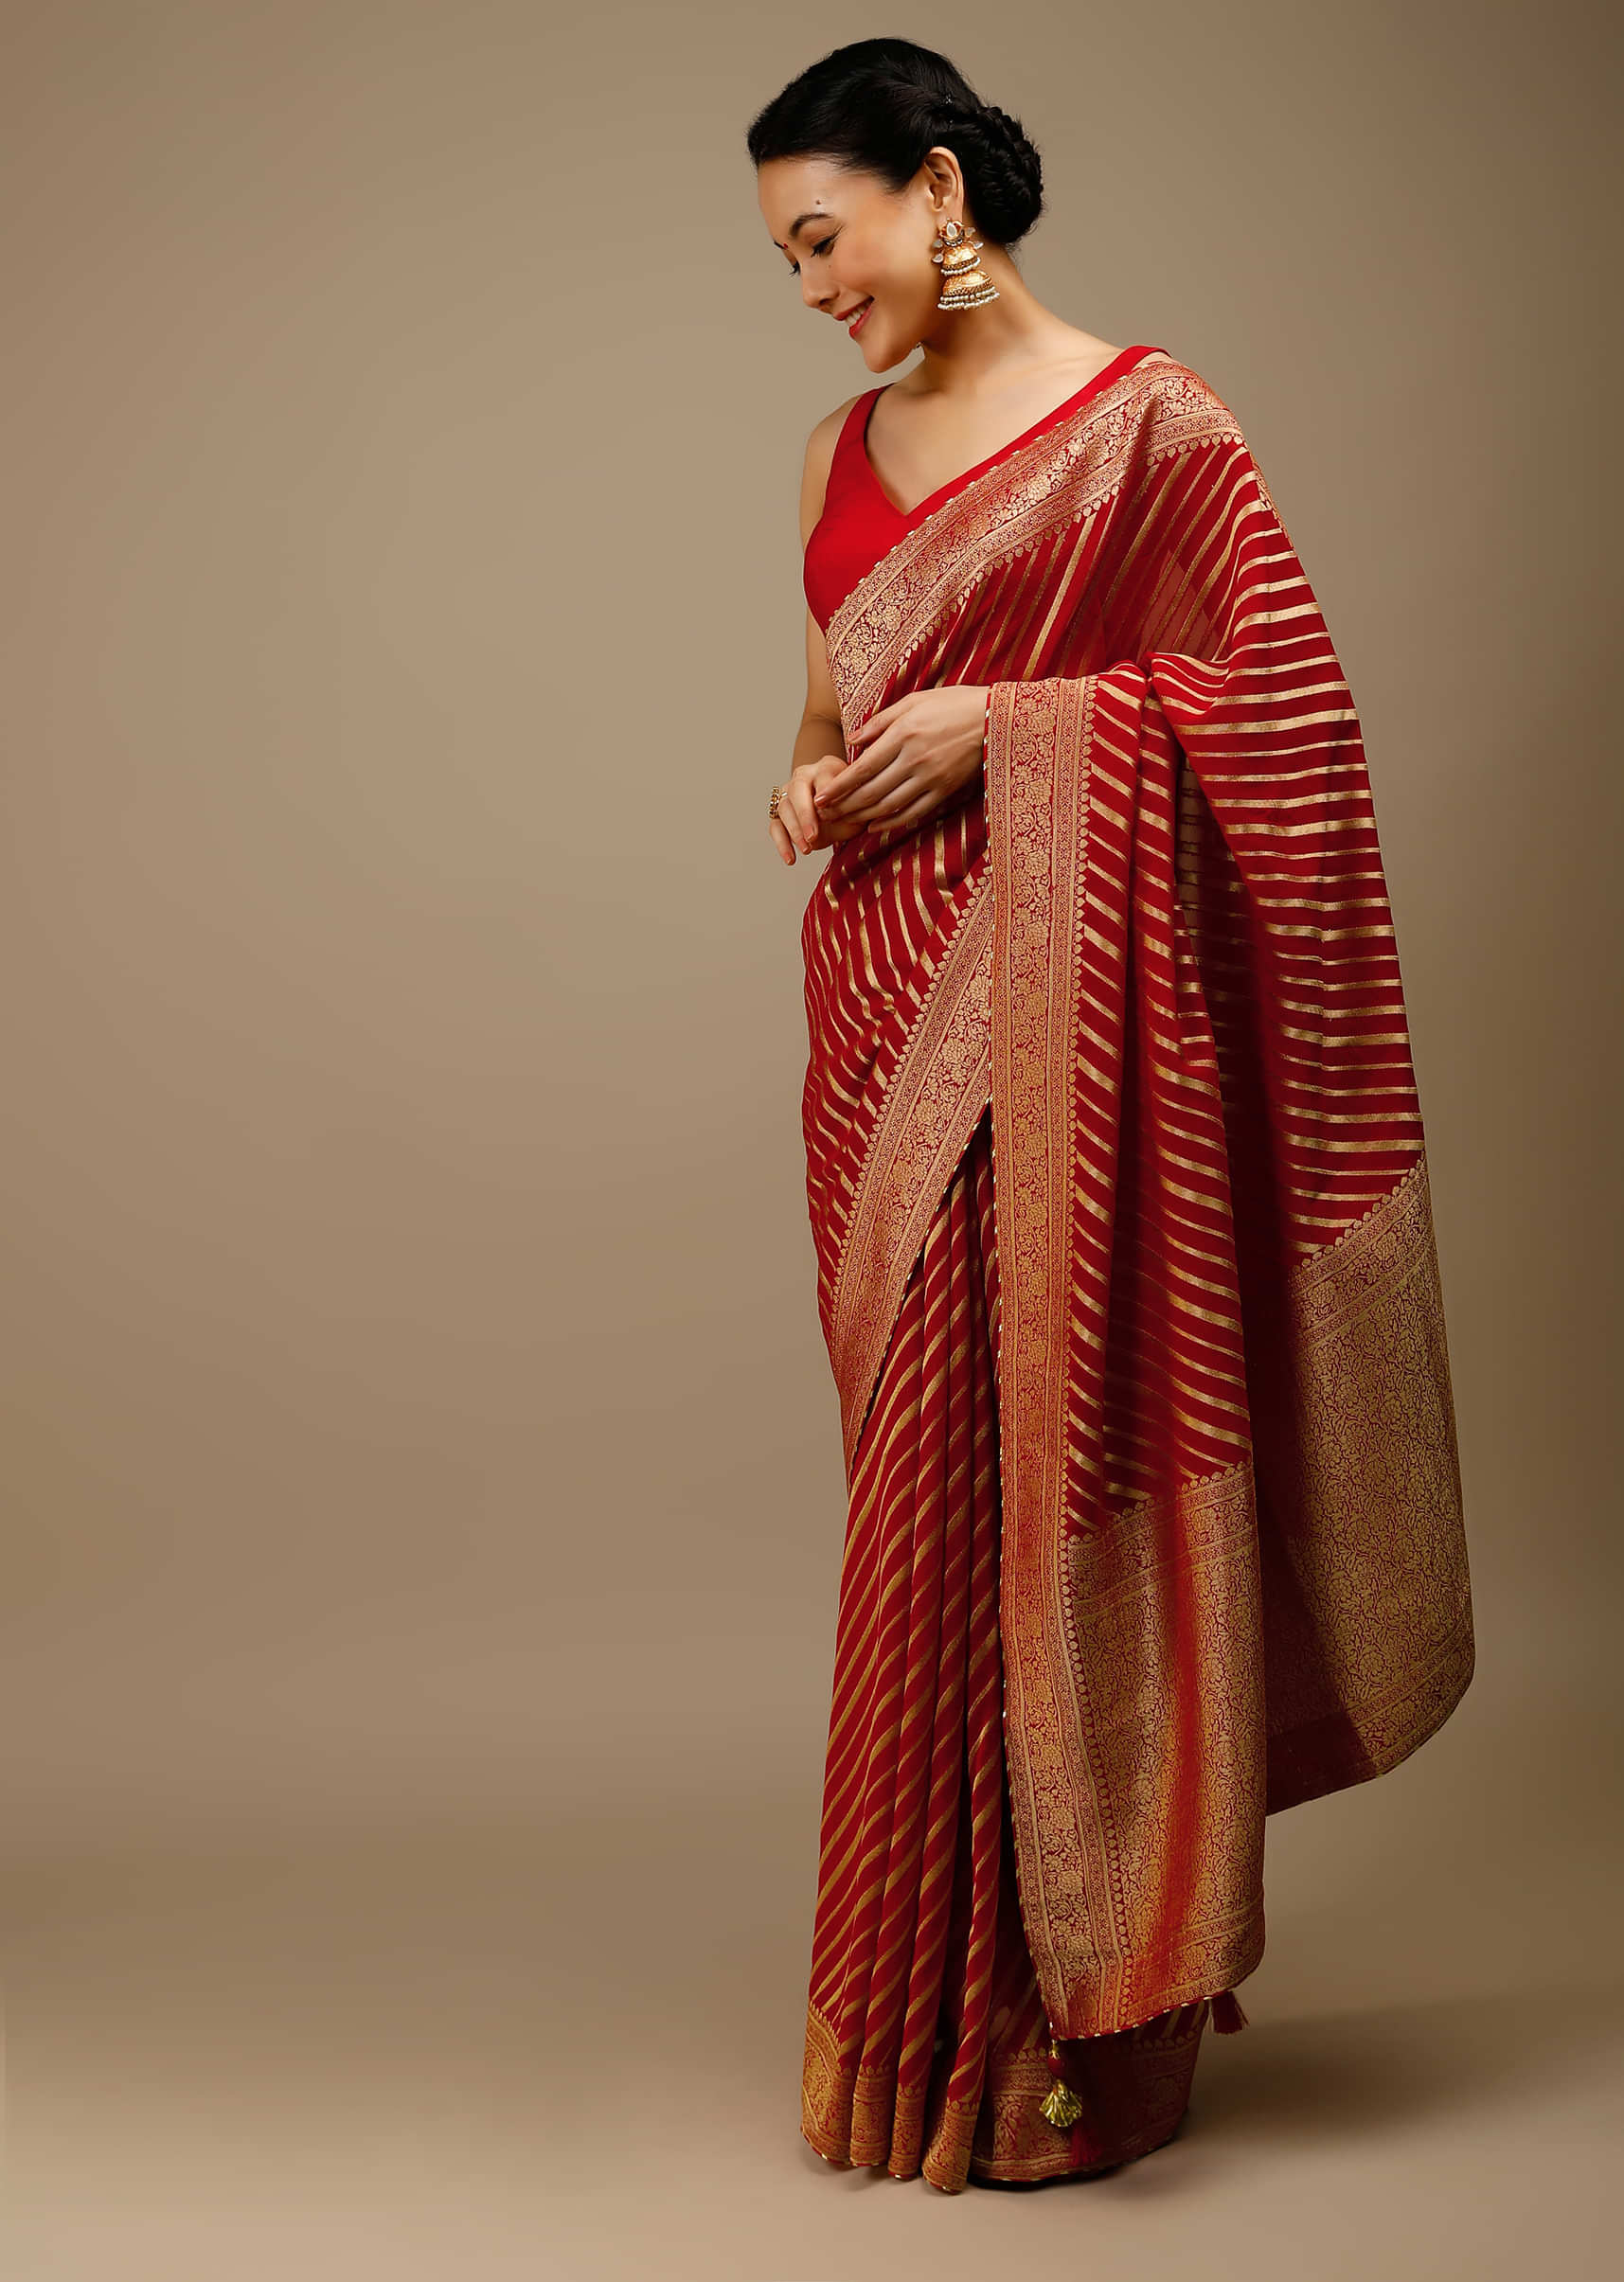 Tomato Red Saree In Georgette With Brocade Woven Diagonal Stripes And Floral Border  